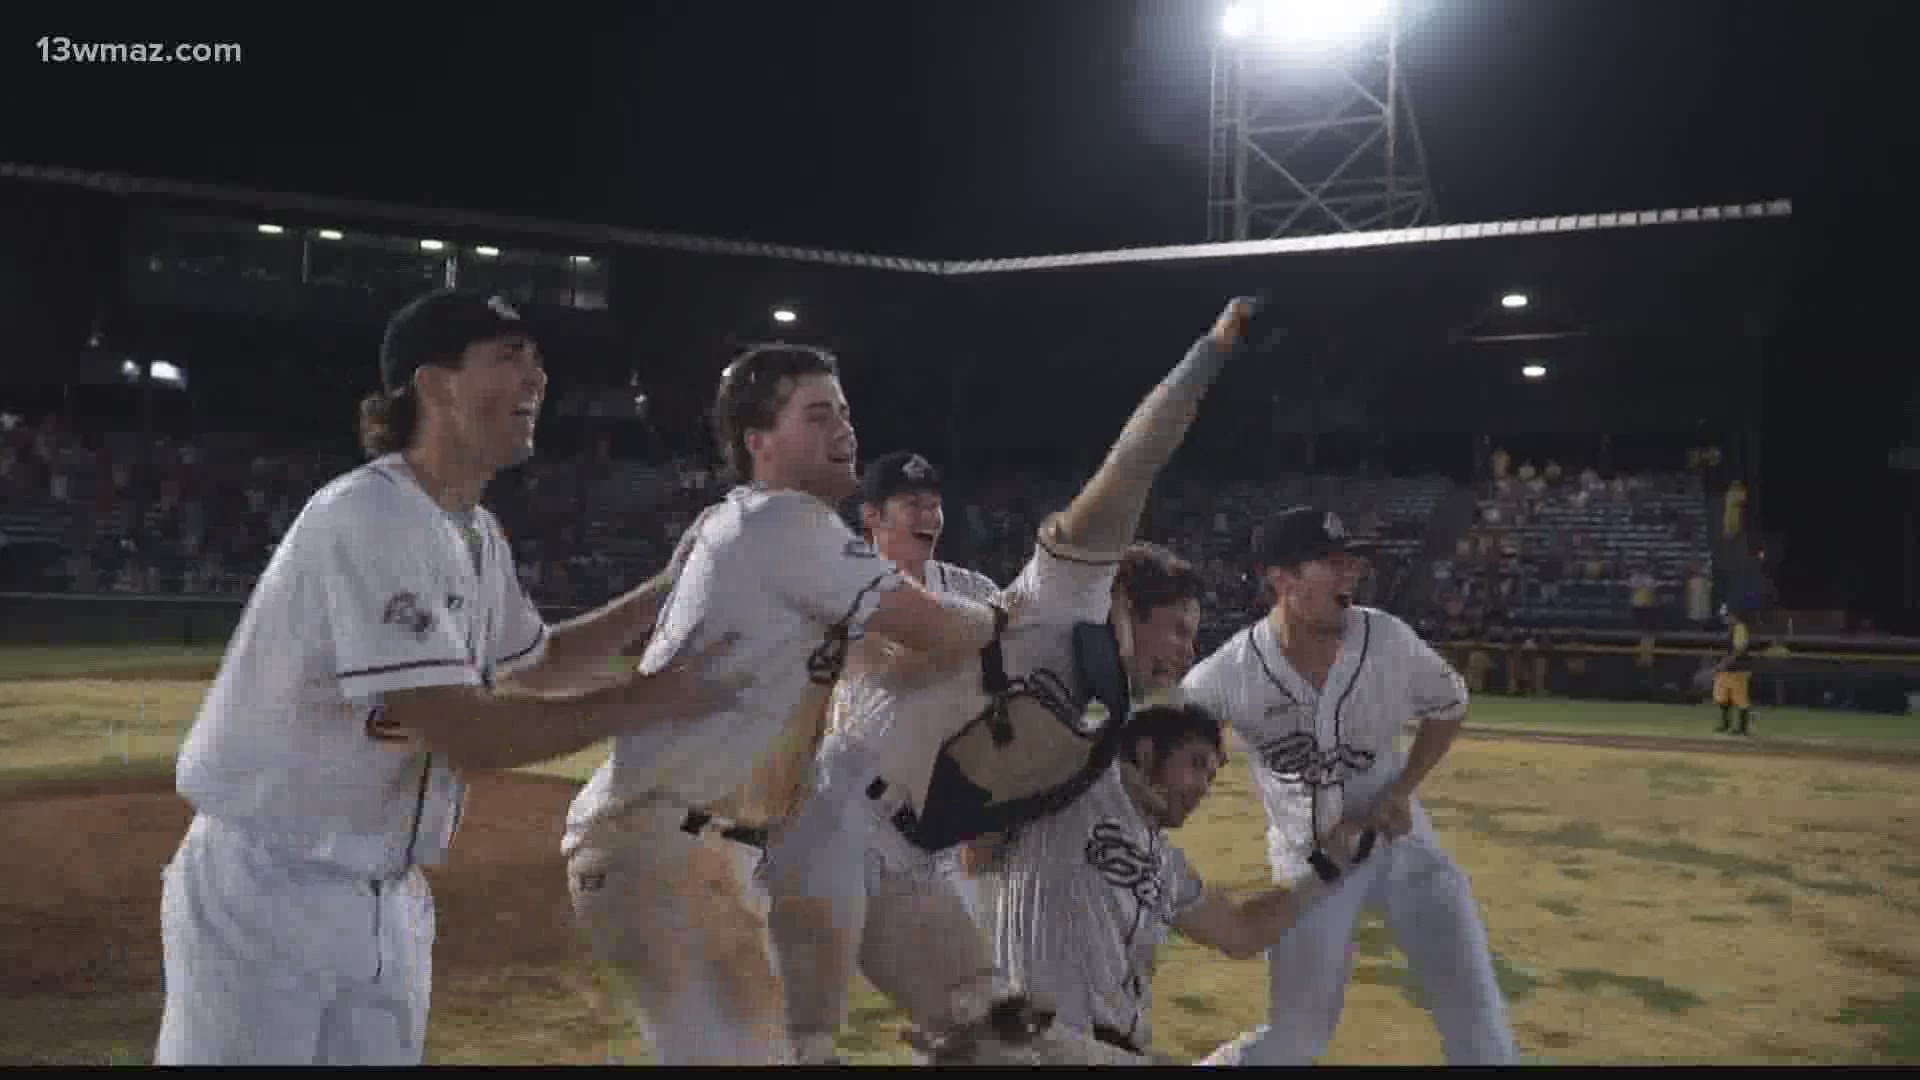 History was made Sunday night when the Macon Bacon took out the Savannah Bananas for the first championship by a Macon baseball team since 1962.